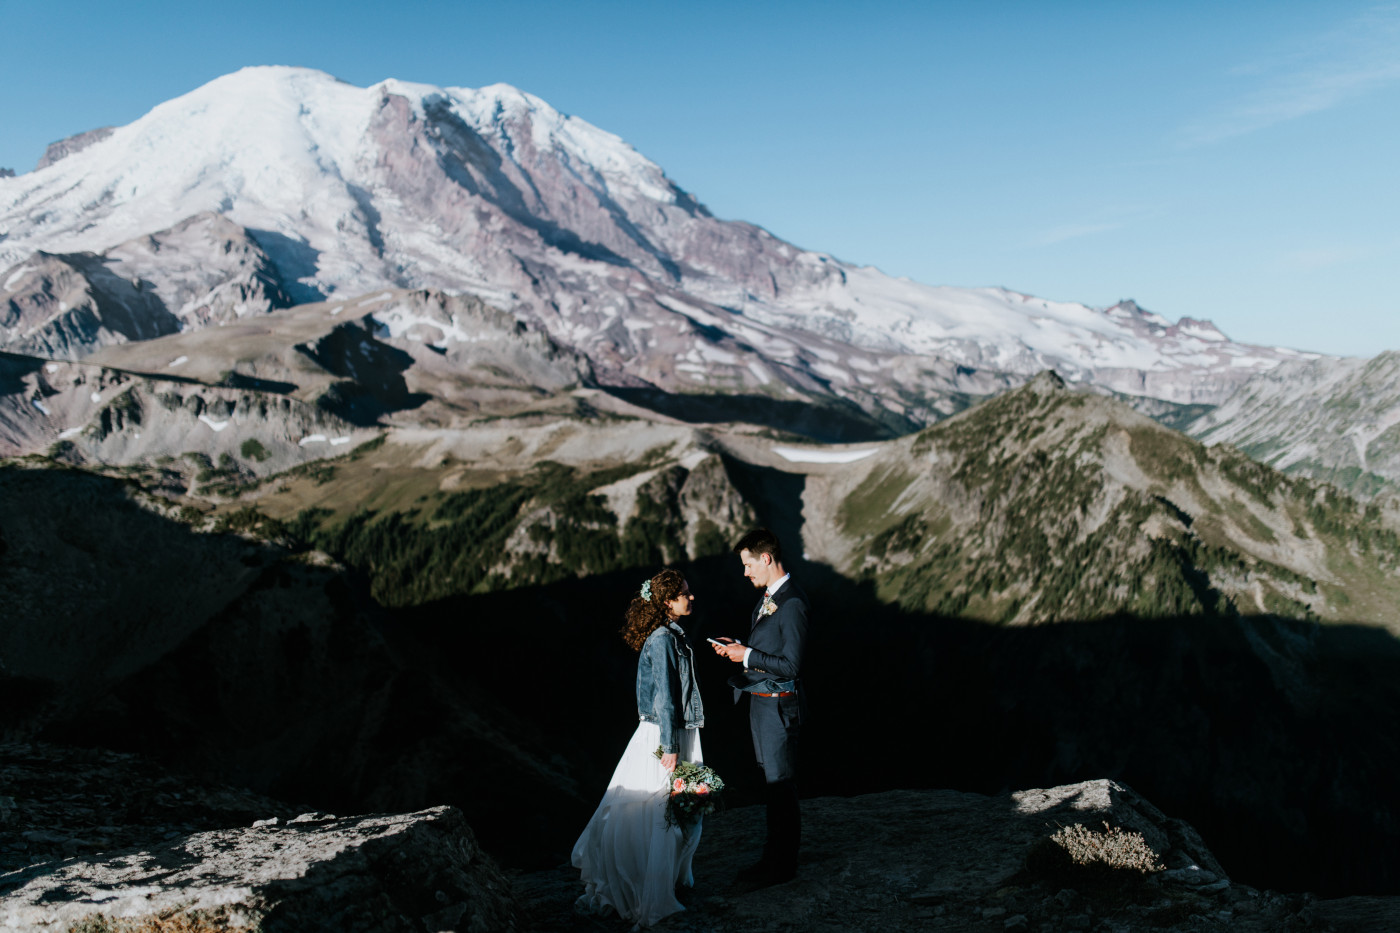 Chad and Tasha during their elopement with a view of the waterfall in the background. Elopement photography at Mount Rainier by Sienna Plus Josh.